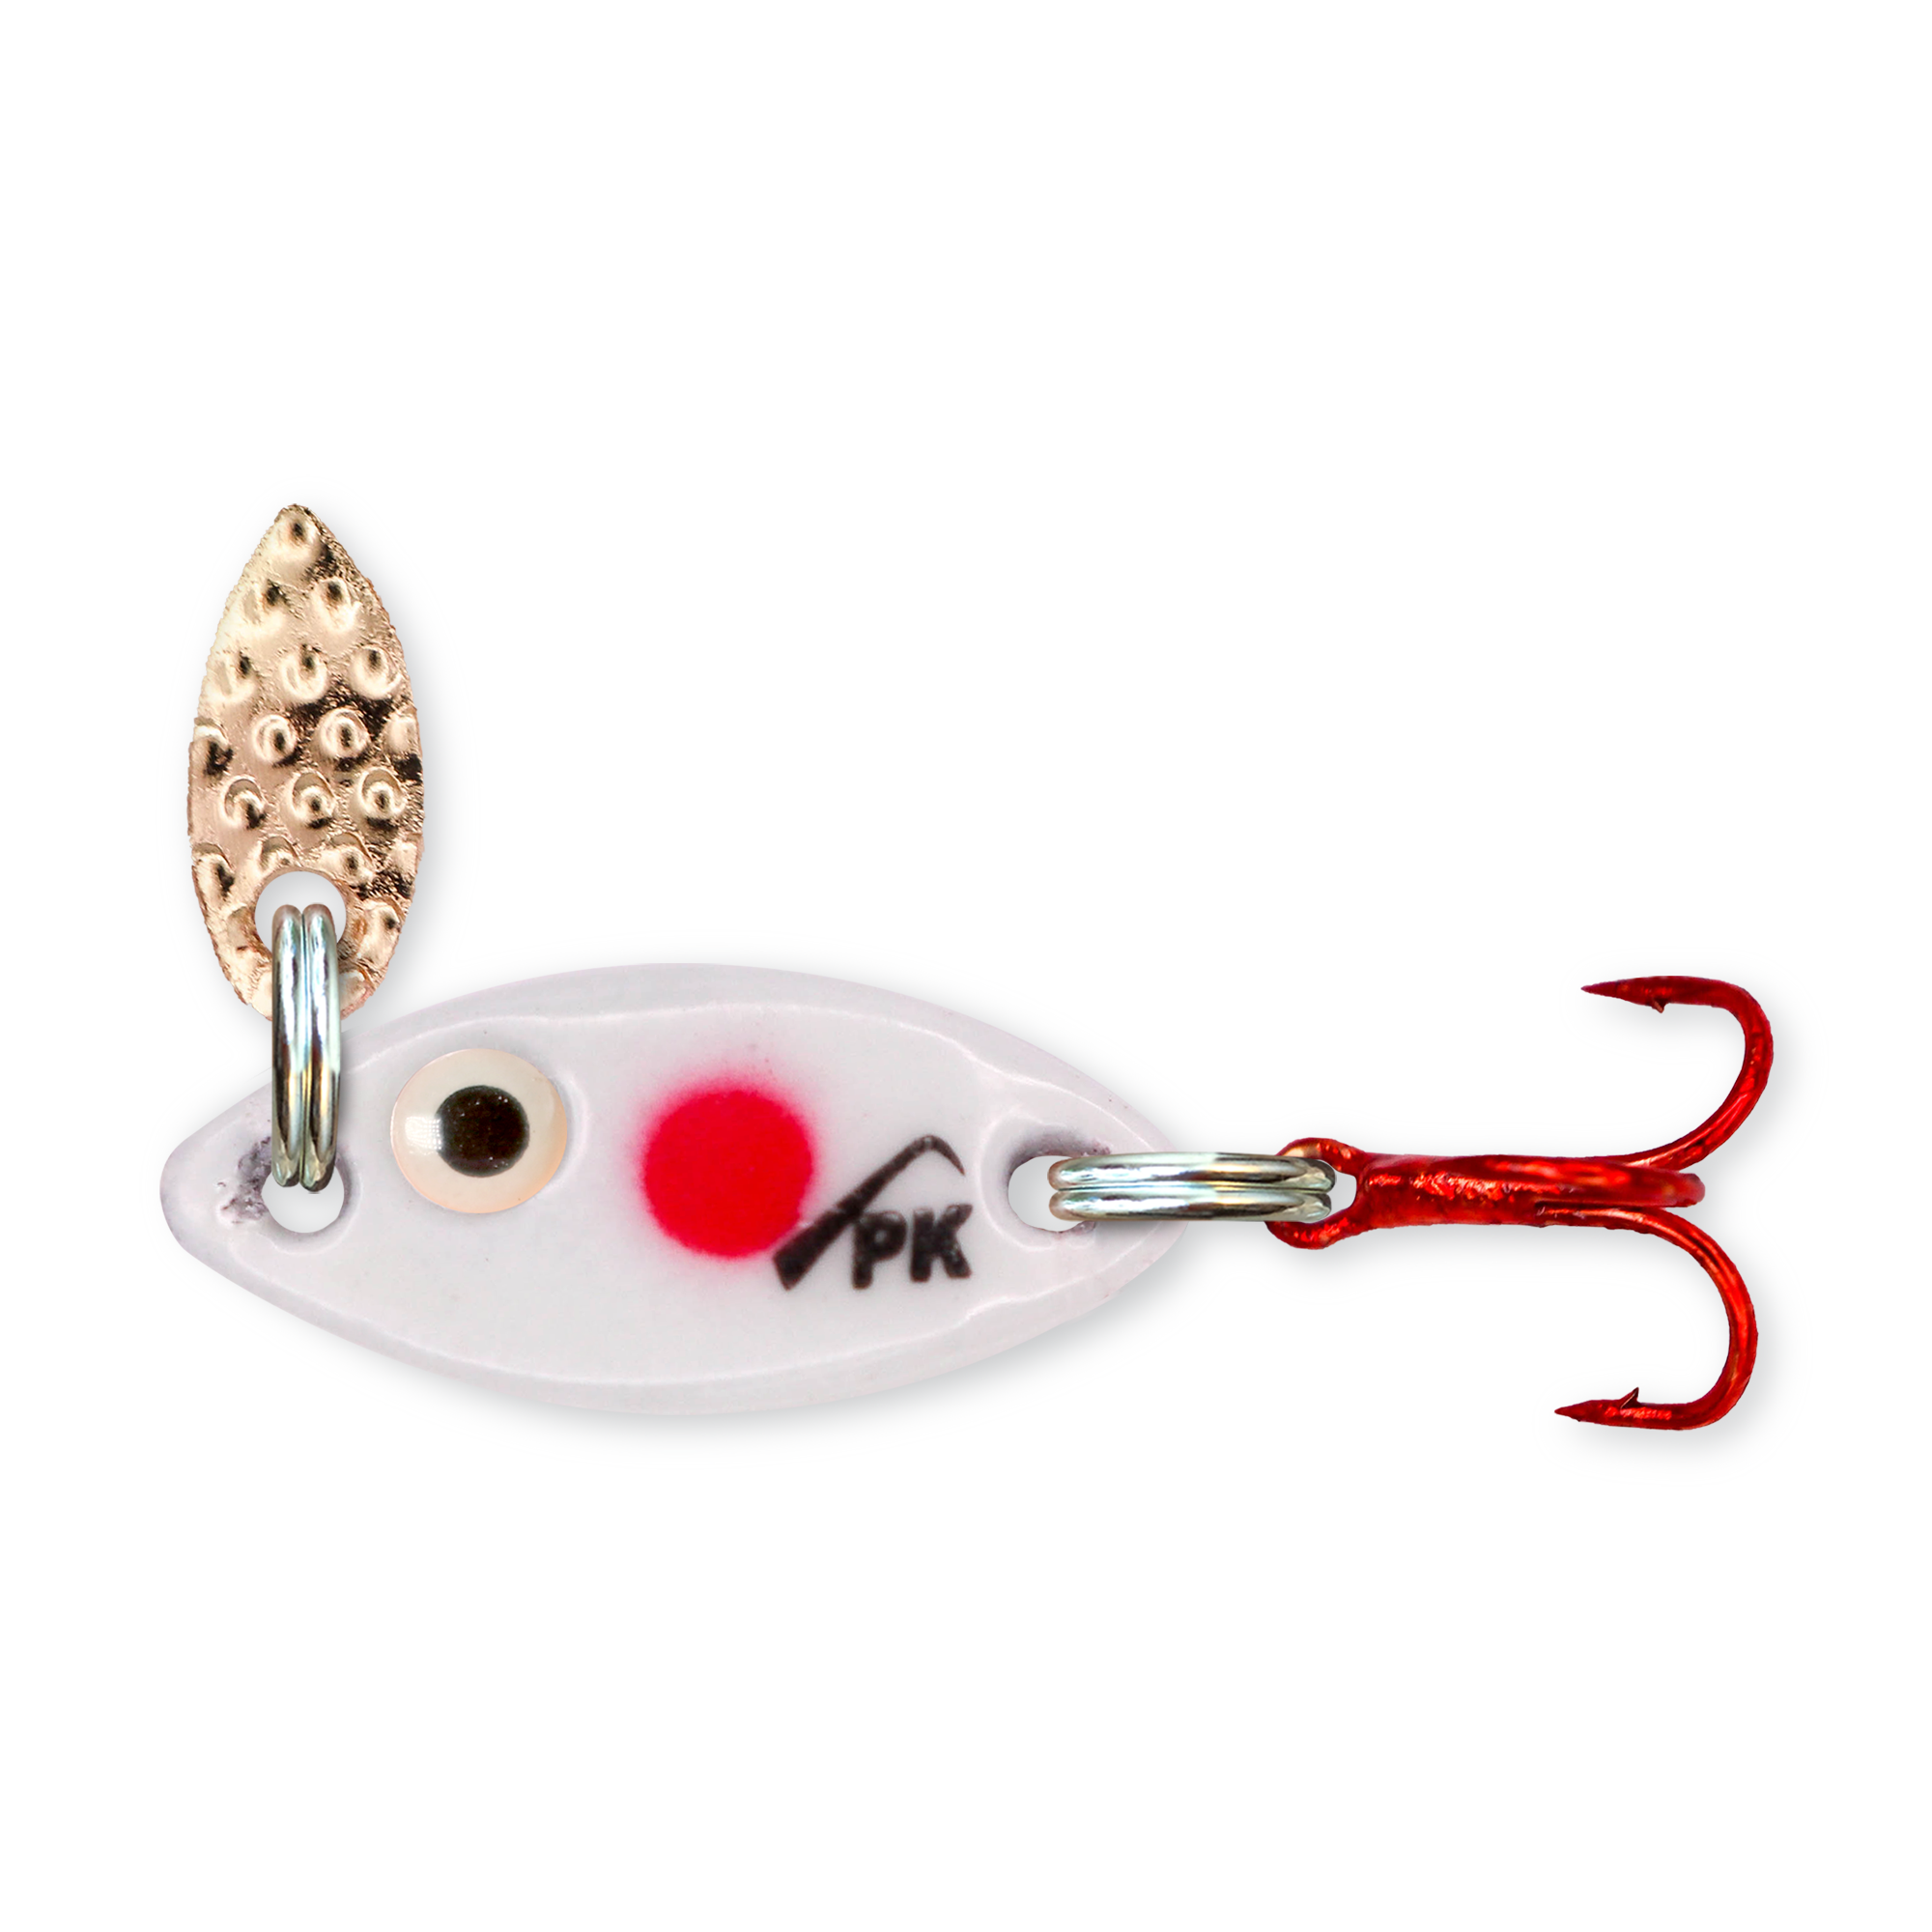 tungsten fishing spoons, tungsten fishing spoons Suppliers and